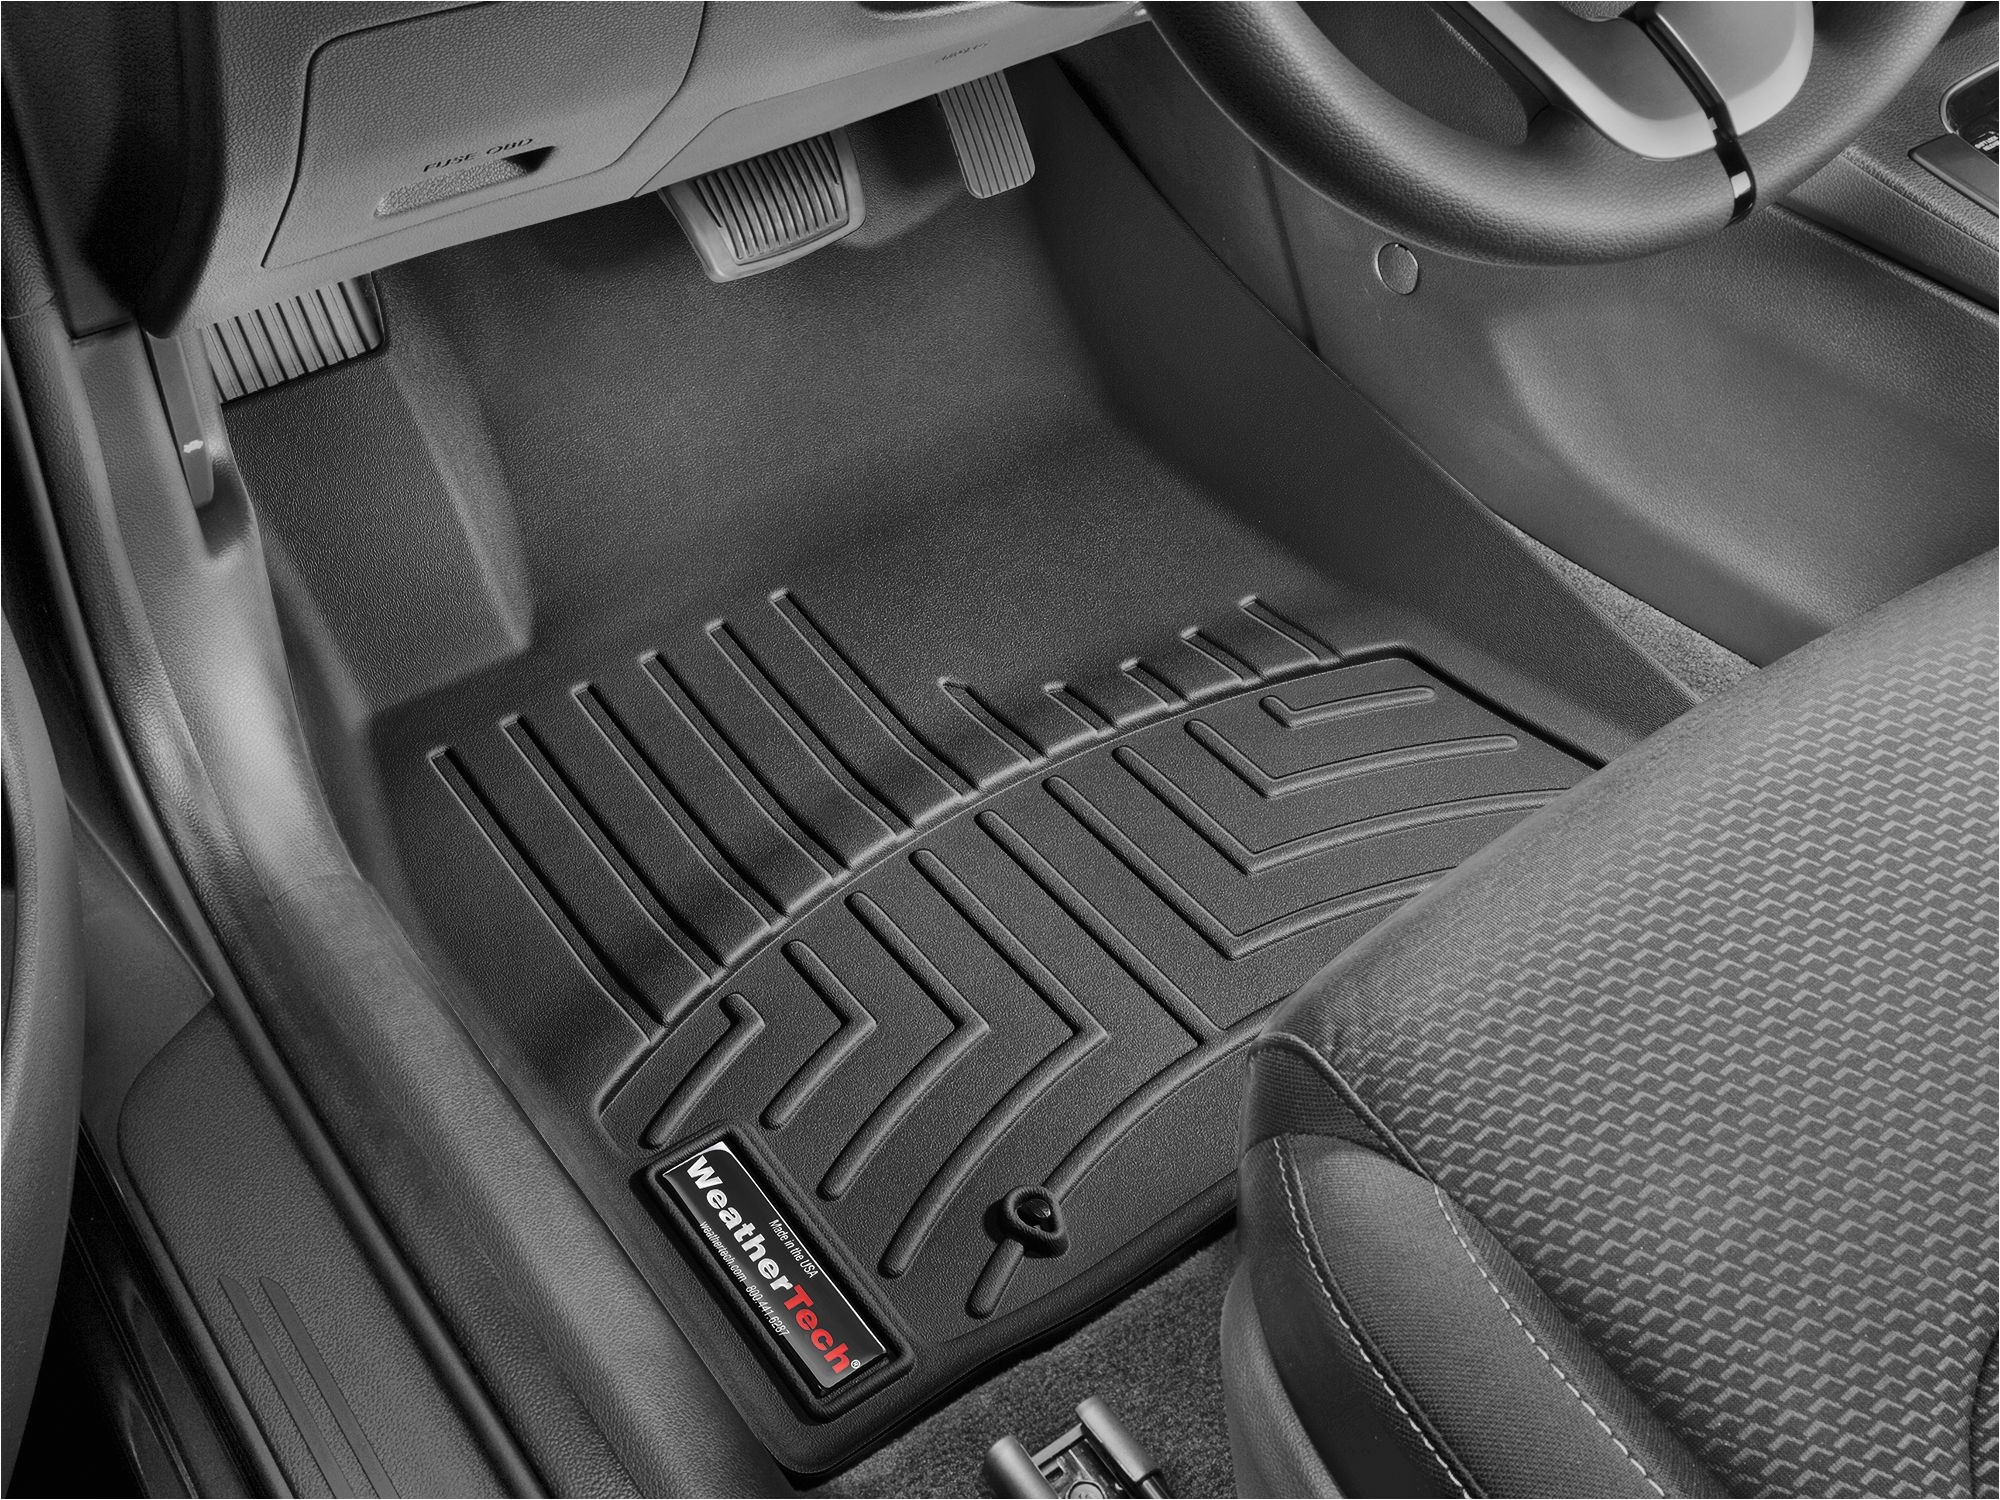 before the snow and salt make a mess of the carpet mats in your car get easy to clean weathertech floorliners installed for complete interior floor